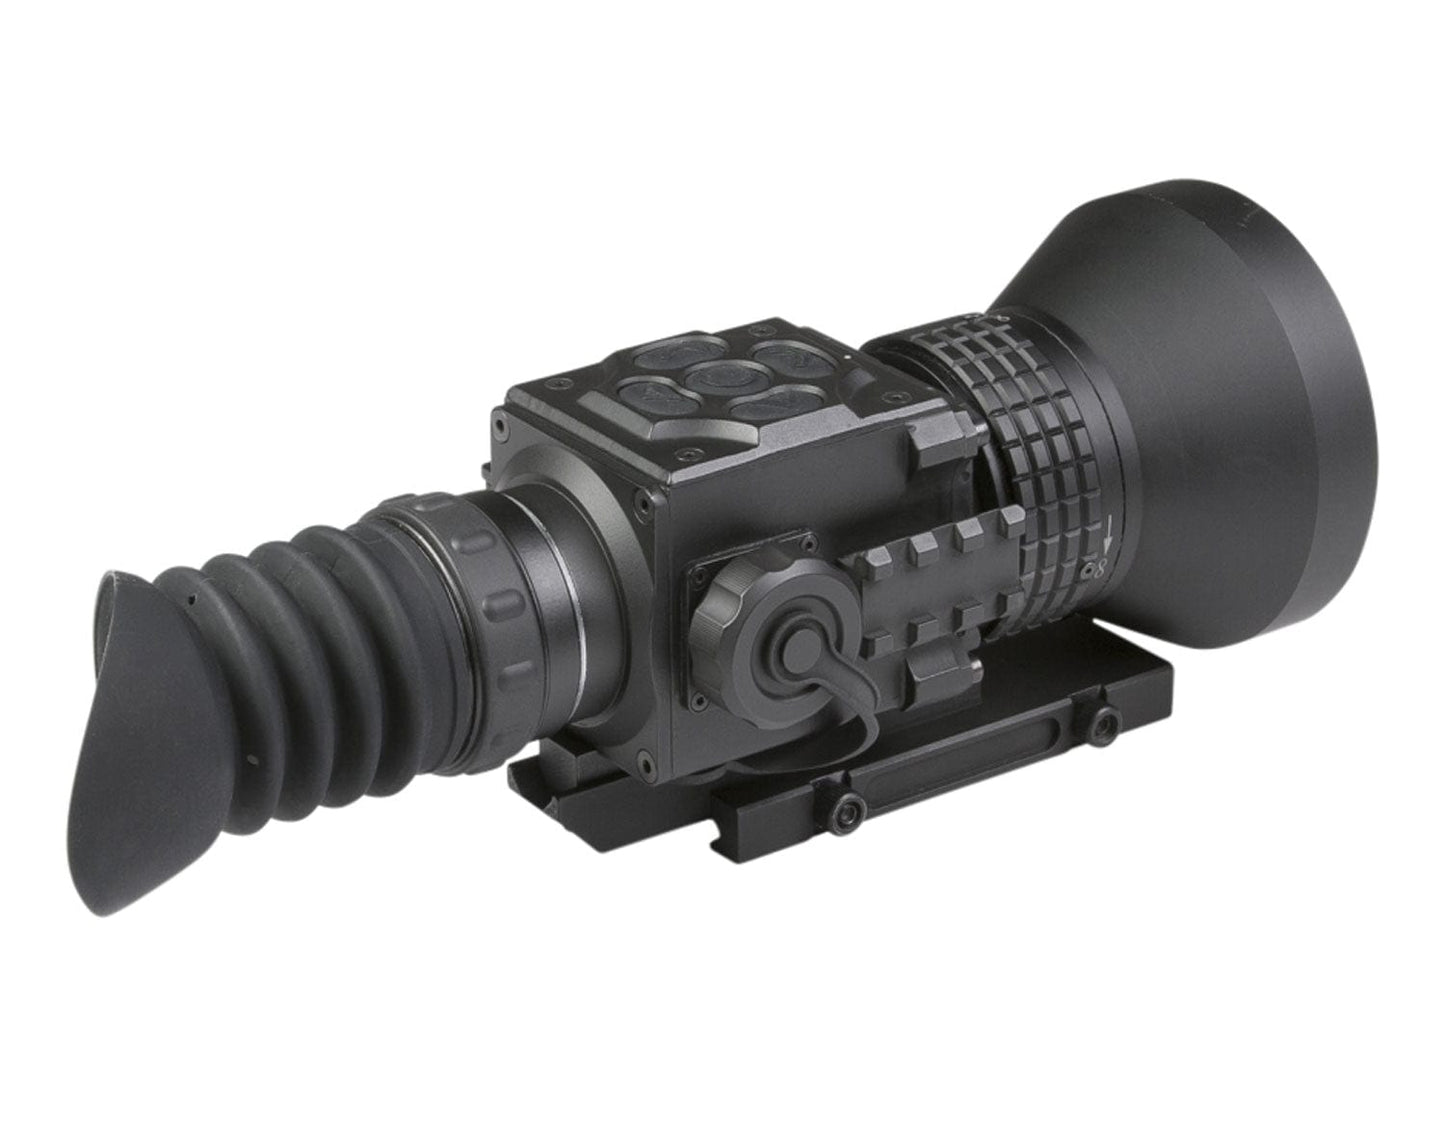 AGM Global Vision Secutor TS75-384 Thermal Riflescope Matte Black 3.6x 75mm Multi-Reticle 384x288 Resolution Digital 1x,2x,4x PIP Zoom Features Rangefinder 3083455008SE71 by Texas Fowlers